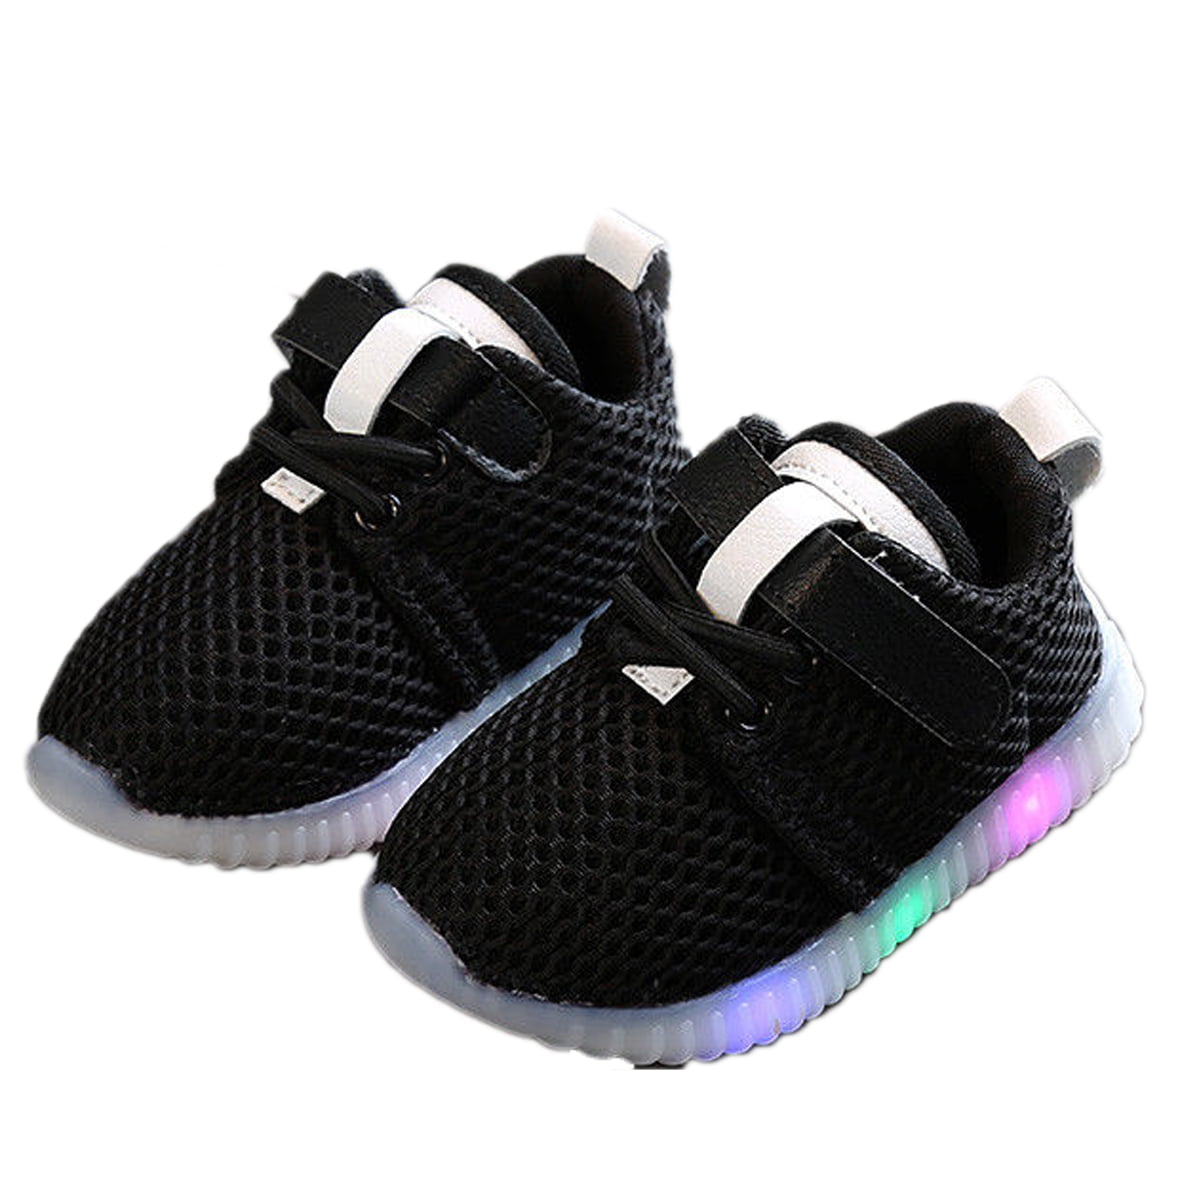 Spiderman Kids LED Light Shoes Luminous Sneakers Trainers Boys Girls Babys NEW 